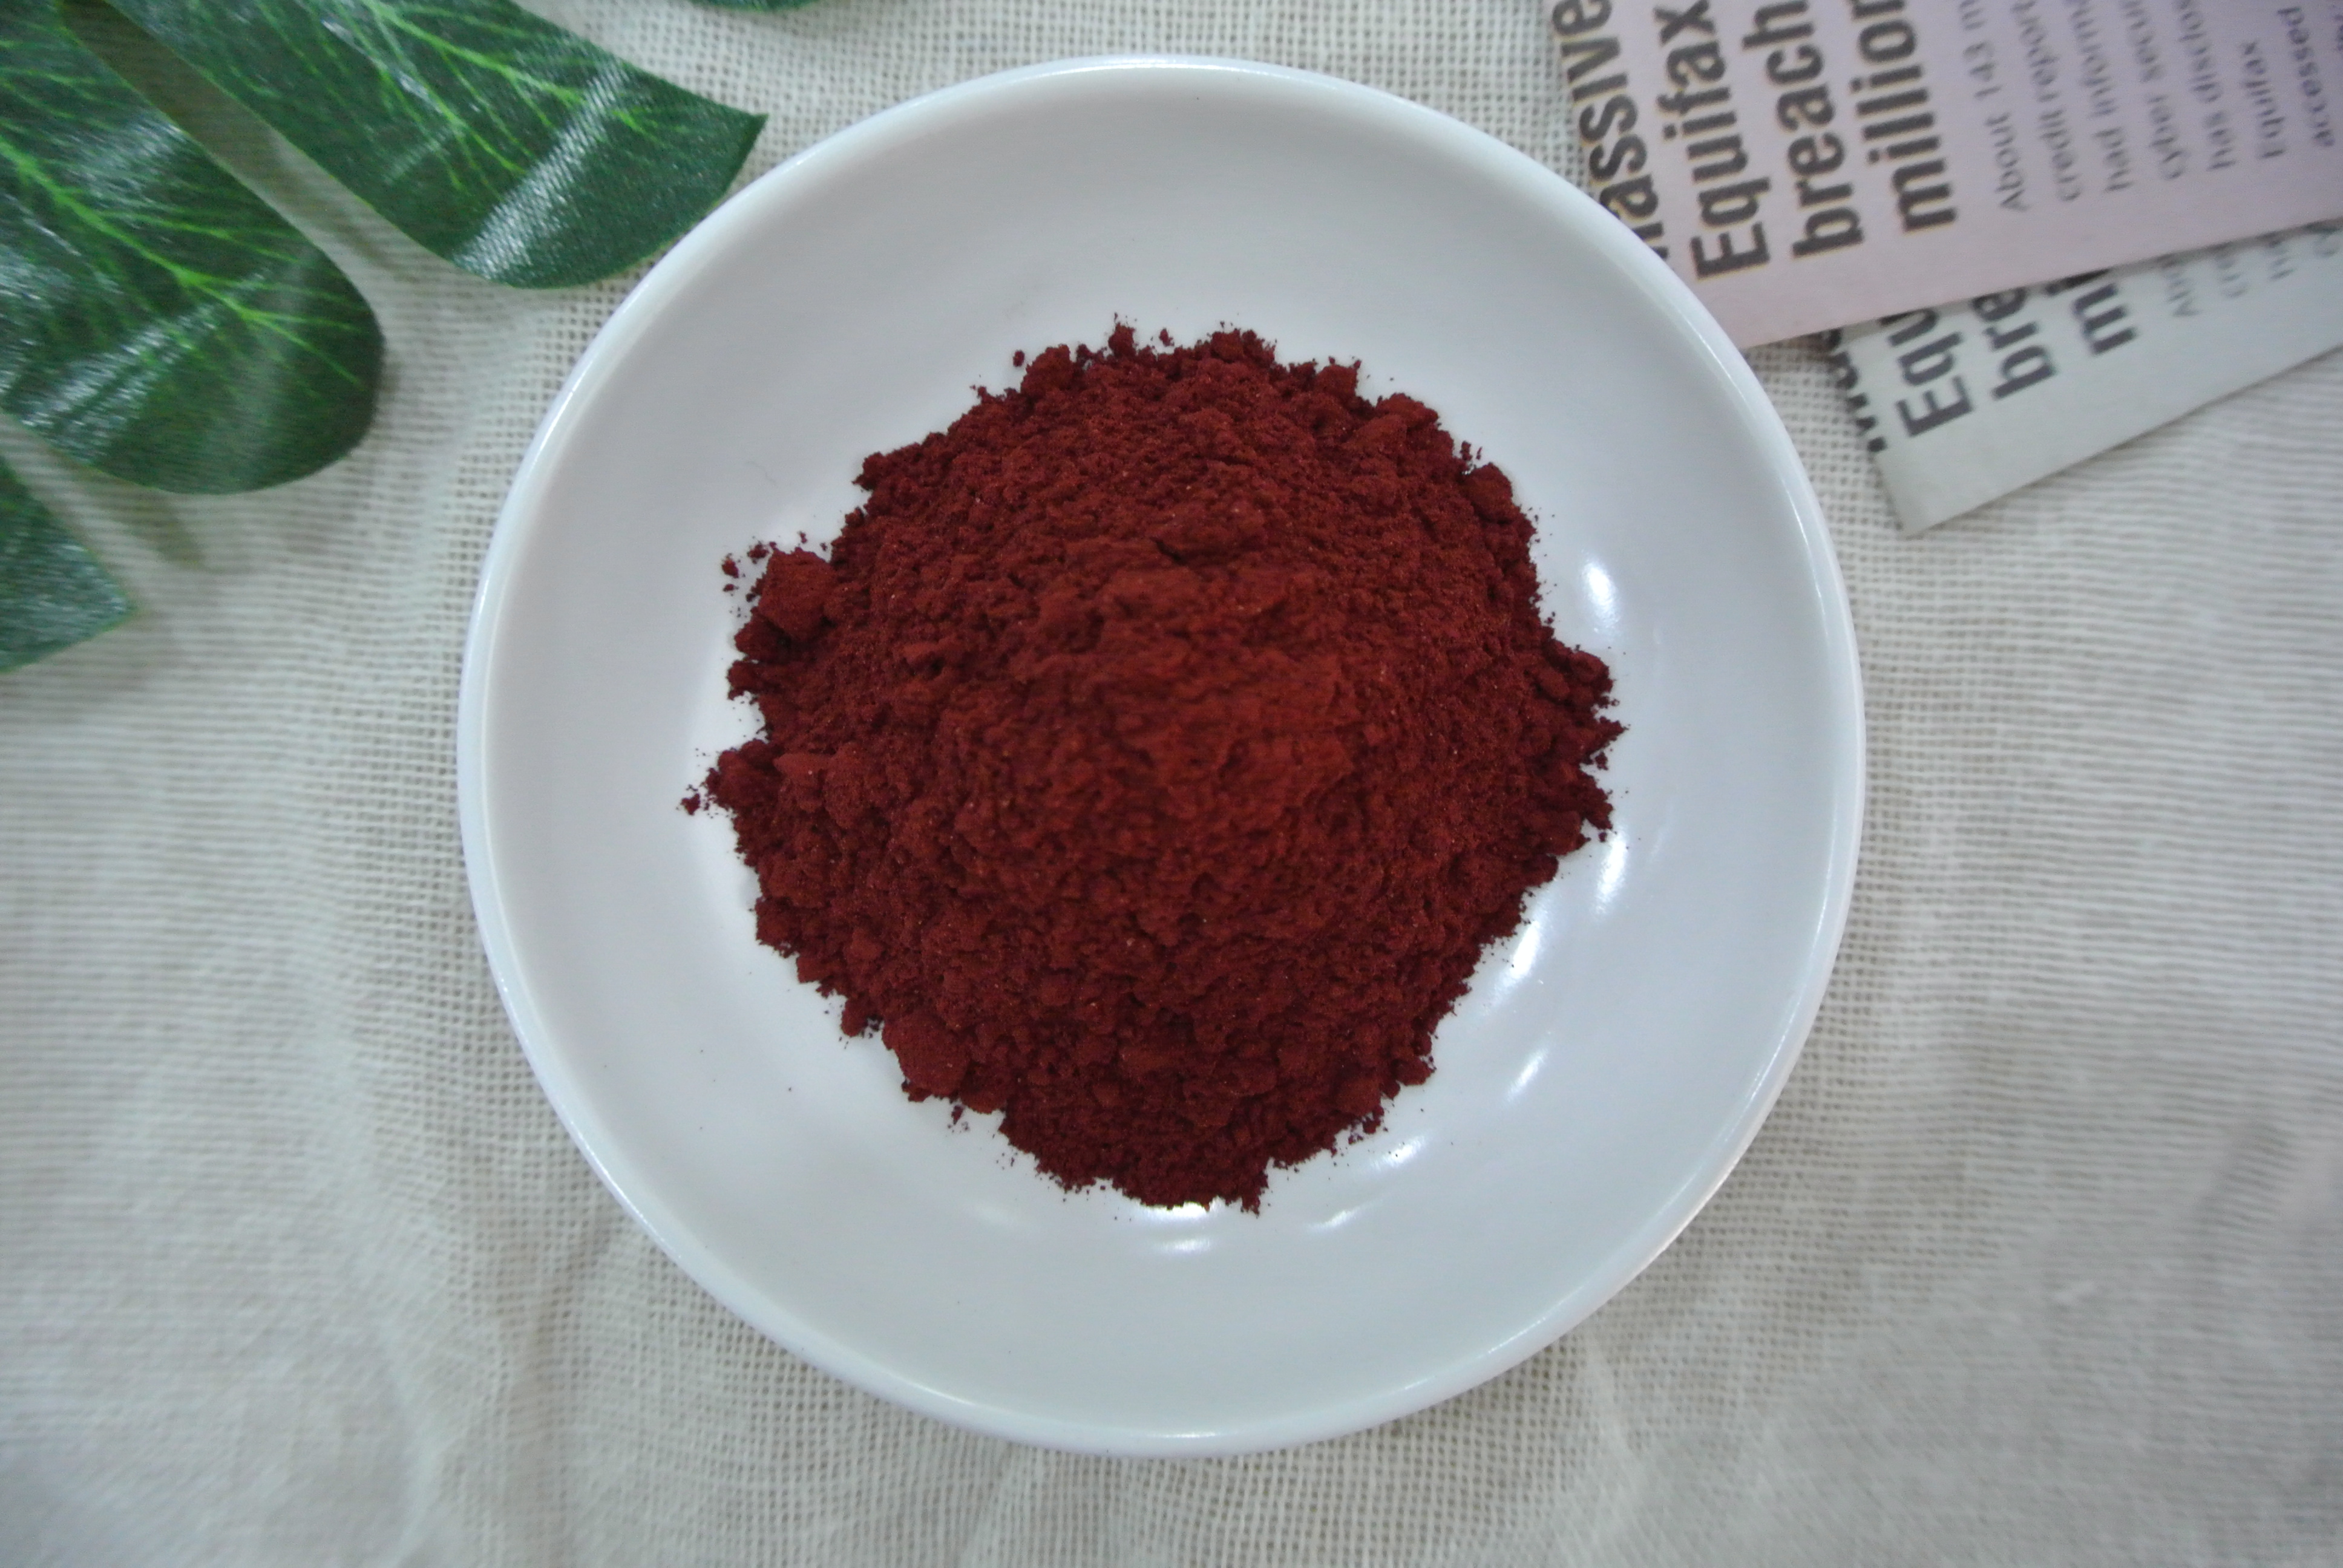 Acid Red 18: A New Choice for Food Coloring or an All-round Dye for Diversified Applications?